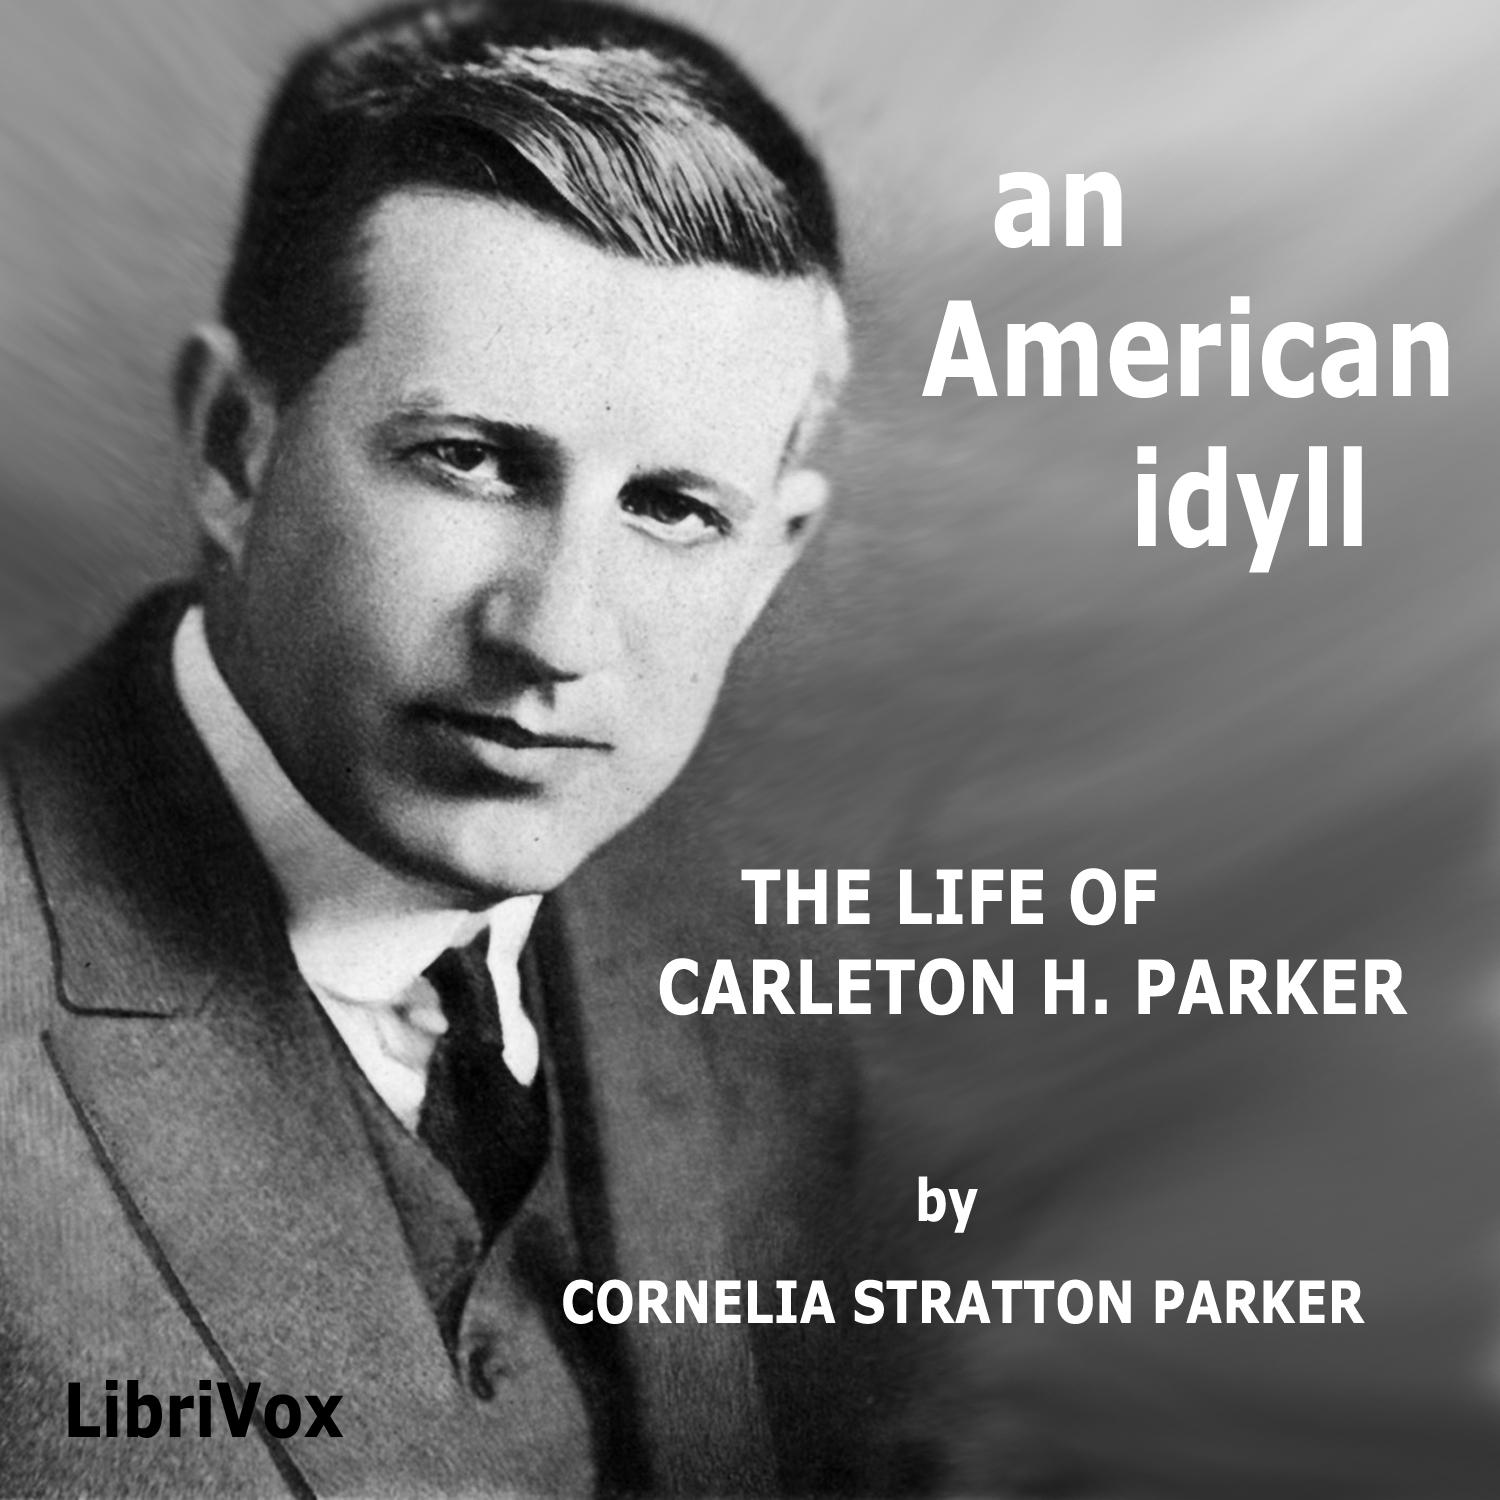 An American Idyll: The Life of Carlton H. Parker, #12 - Chapter XI